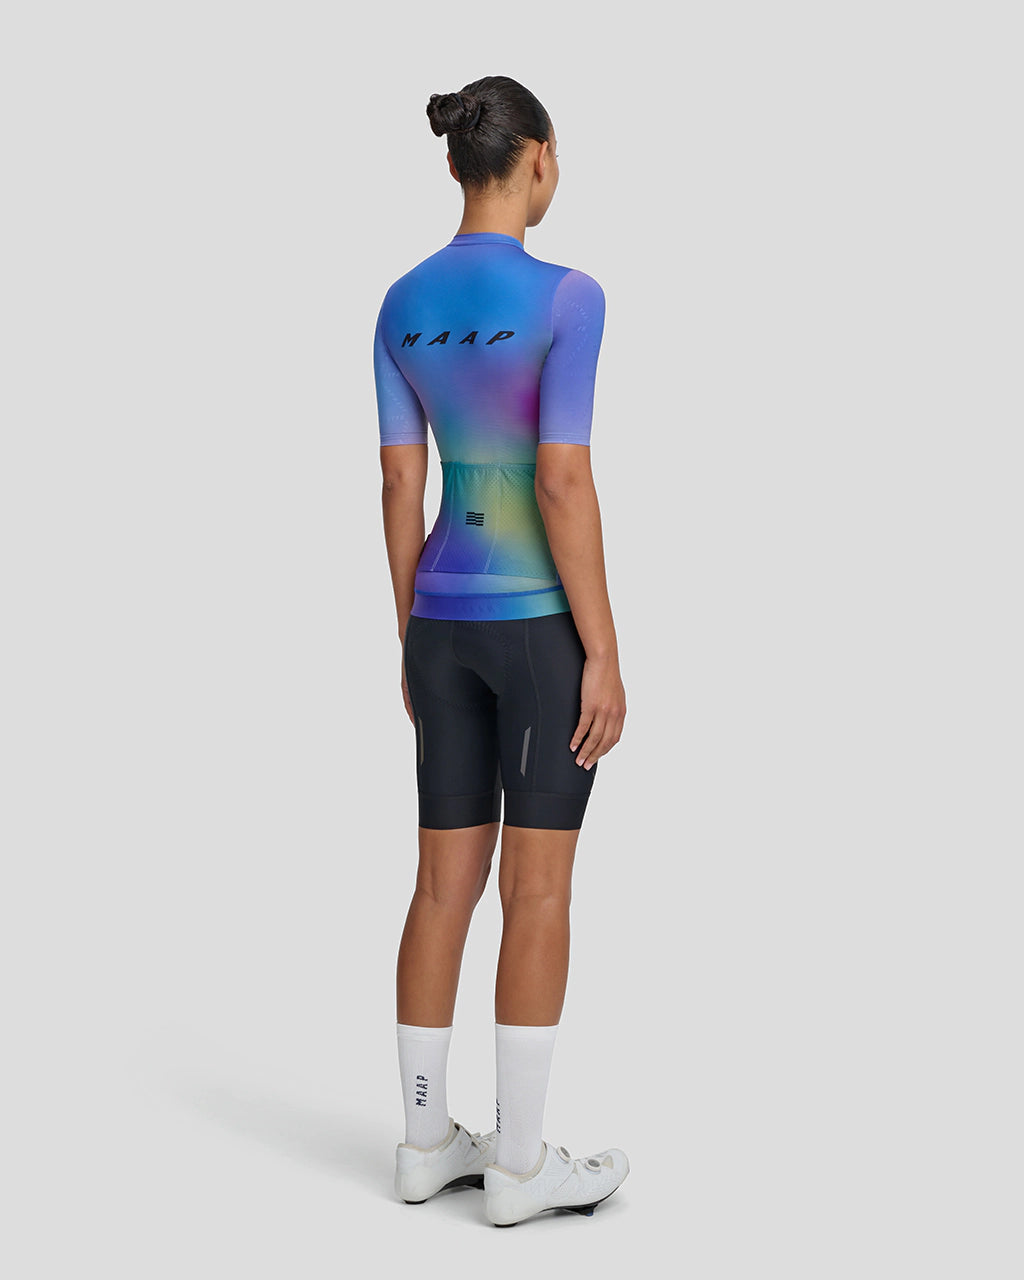 Camiseta Blurred Out Pro Hex para mujer 2.0